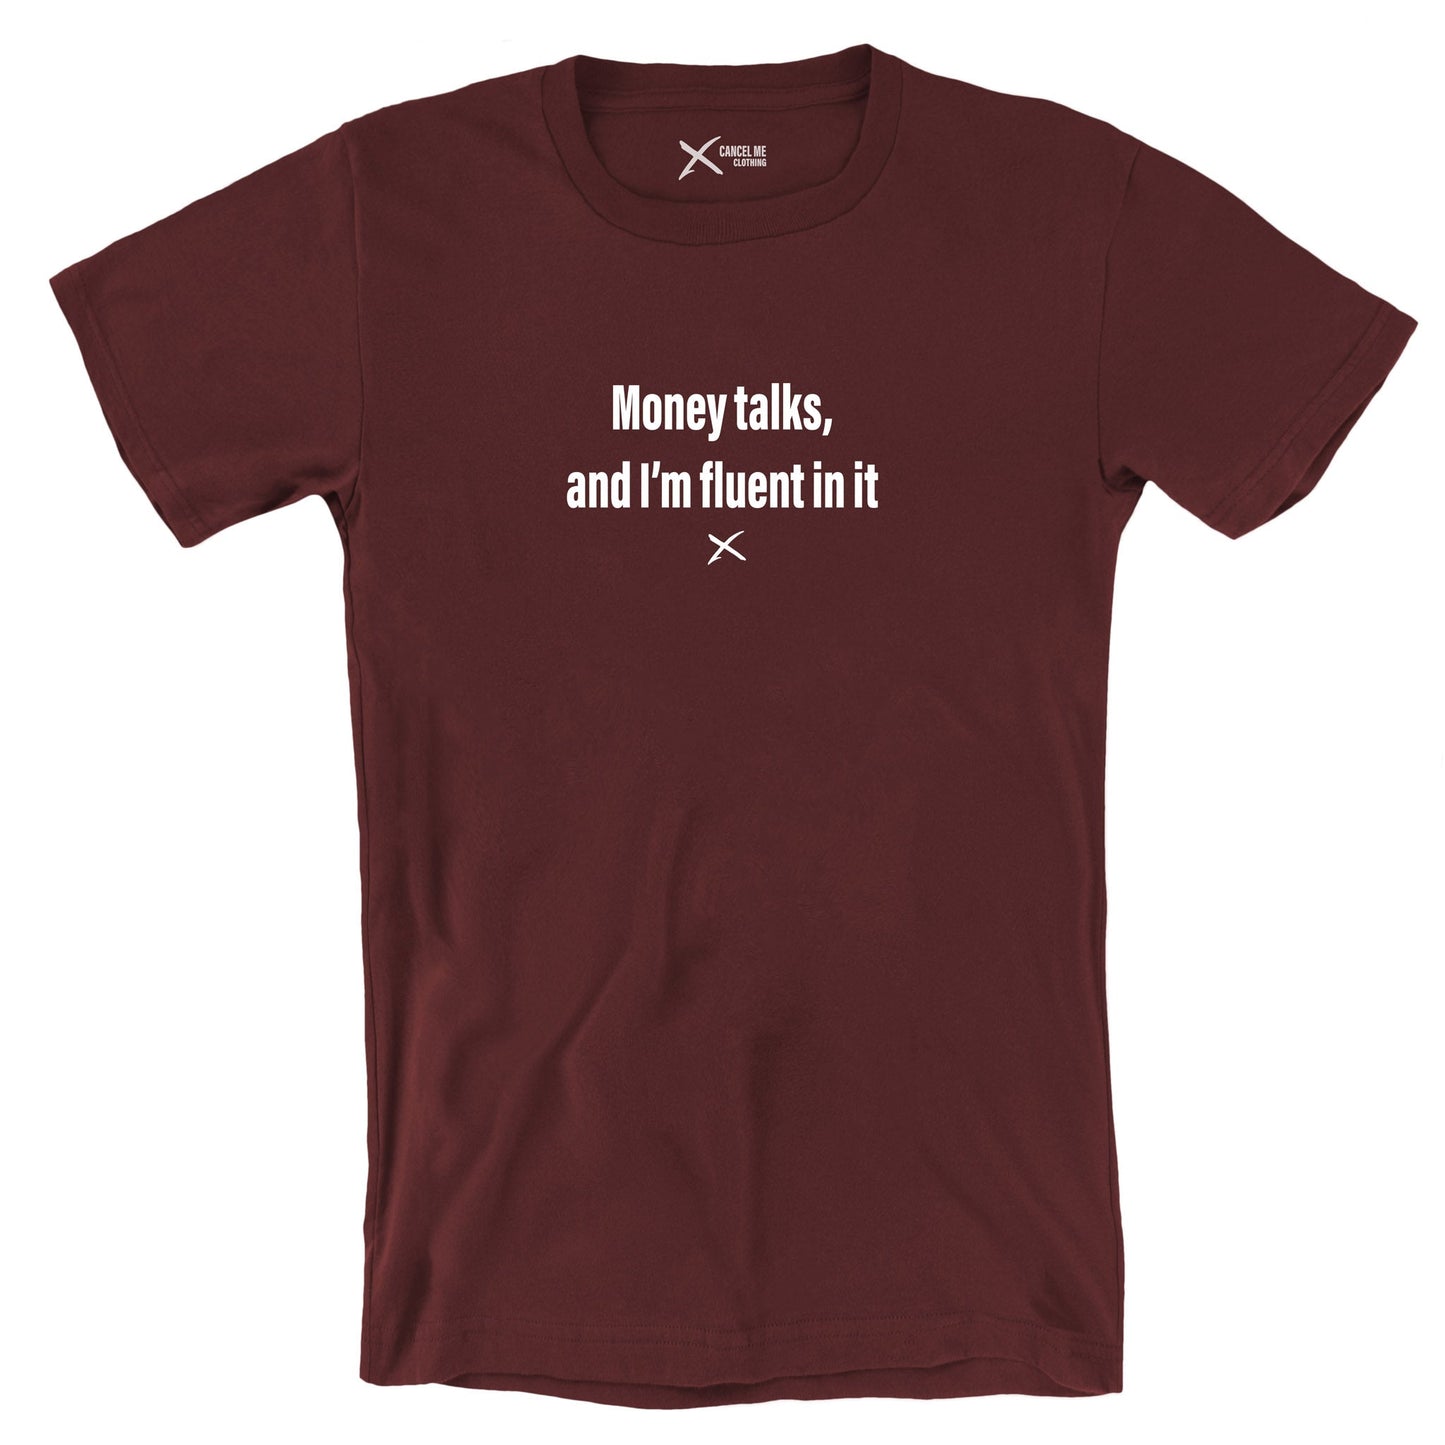 Money talks, and I'm fluent in it - Shirt